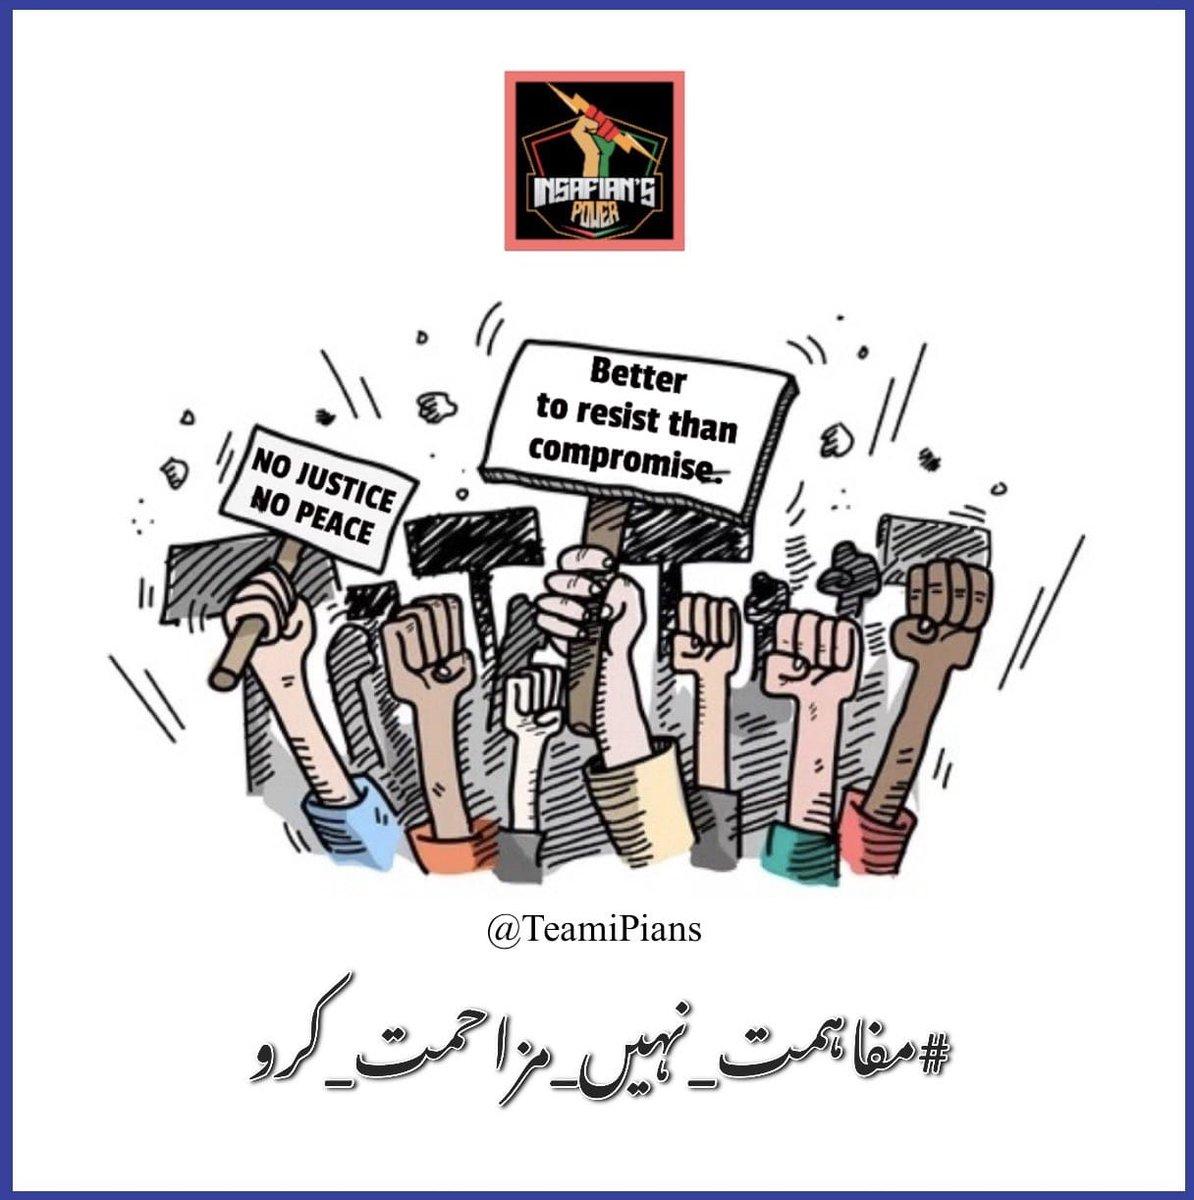 The sit-in at Swabi Interchange
 He is working for the release of Imran Ahmad Khan Niazi
 The senior leadership of the party is not serious about it
#مفاہمت_نہیں_مزاحمت_کرو
@TeamiPians